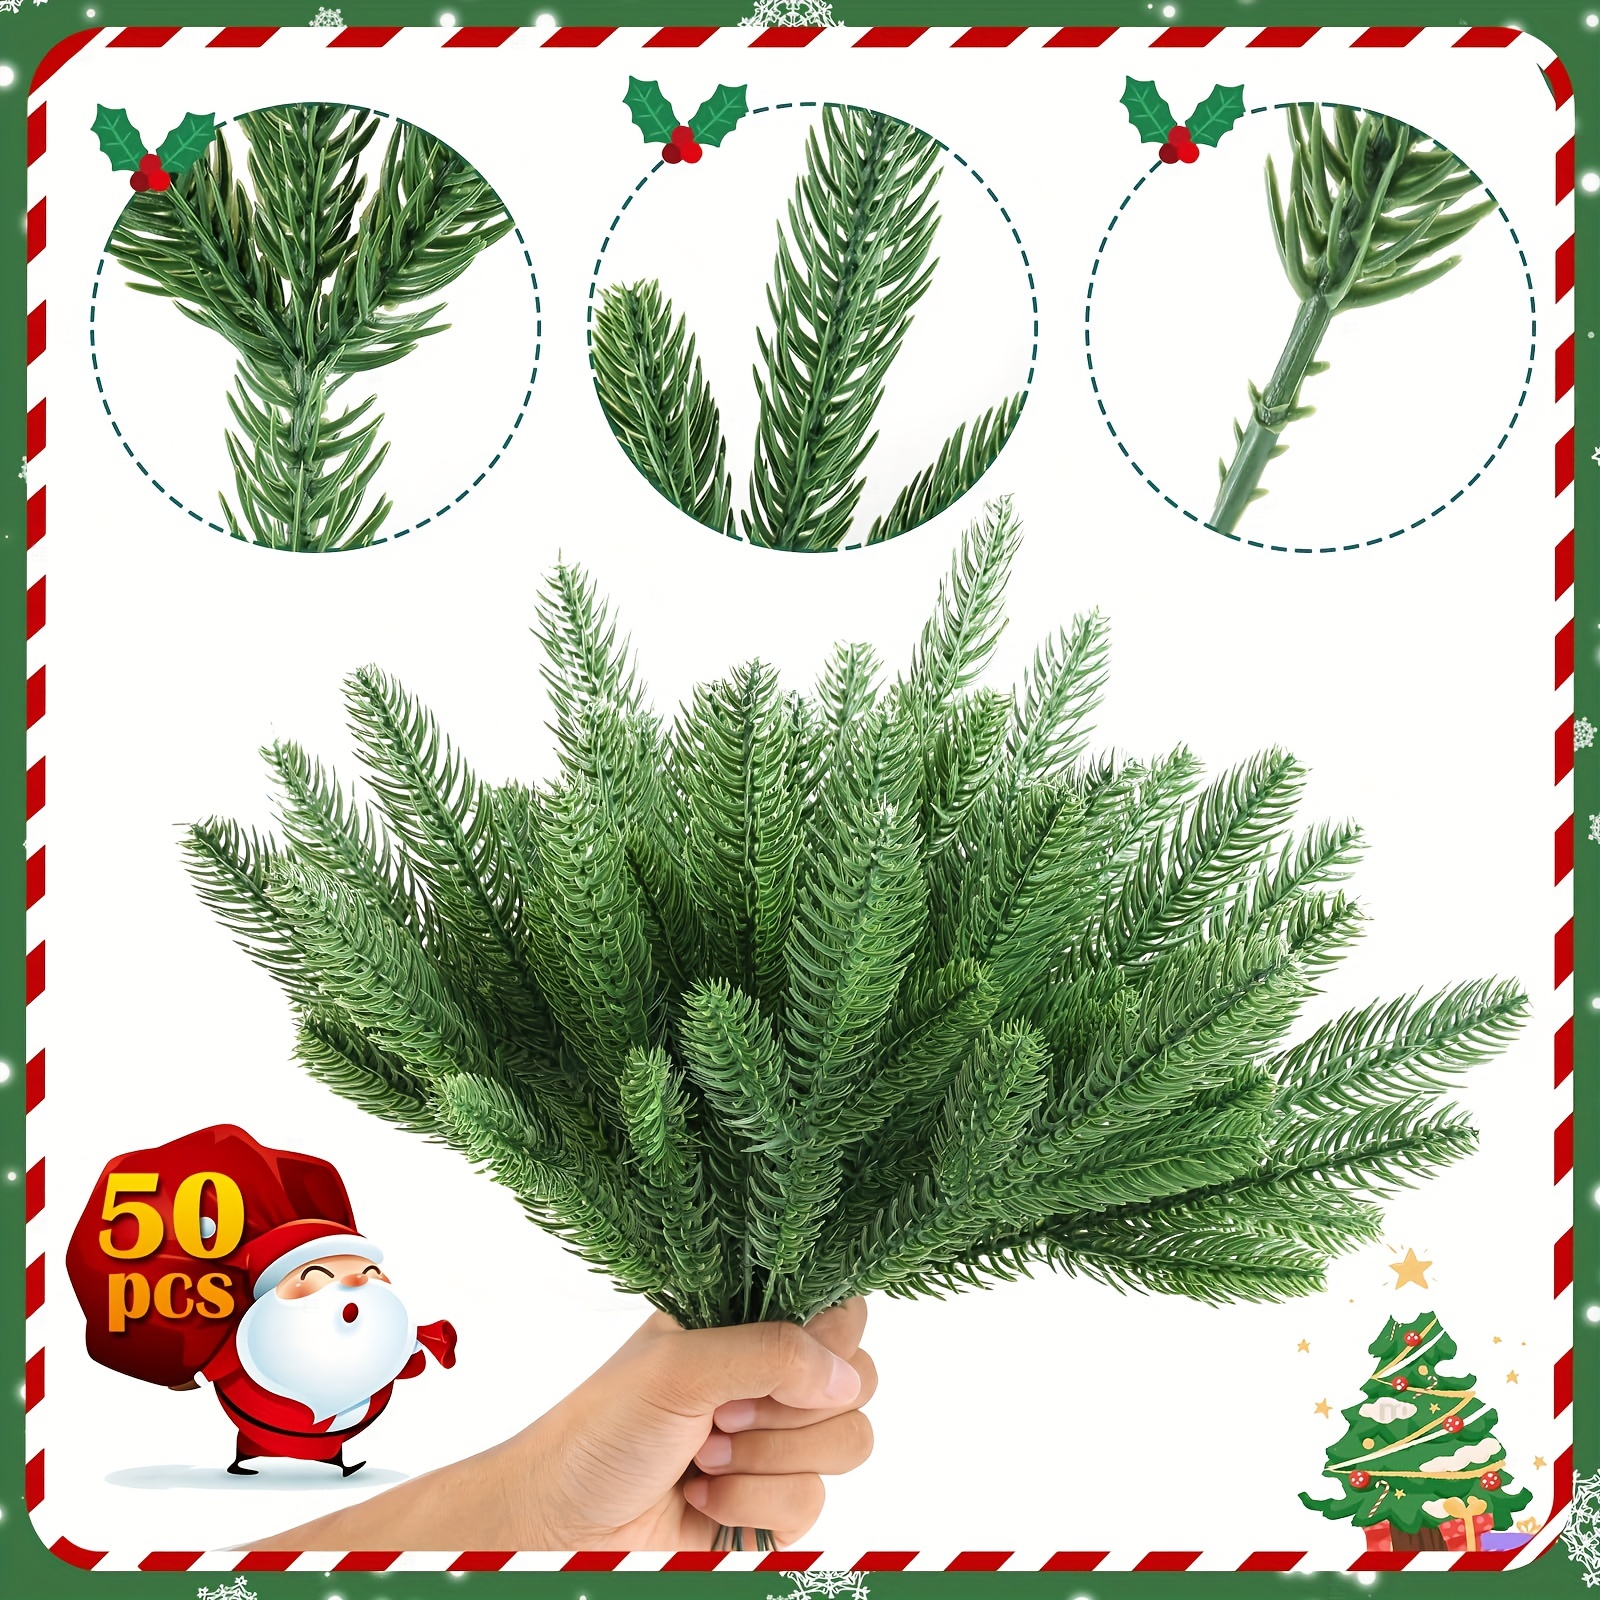 COOPHYA 50pcs Plastic PVC Pine Needles Pine Branches Fake Evergreen  Branches Christmas Wreath Picks Pine Tree Branches Christmas Supplies Green  Pine